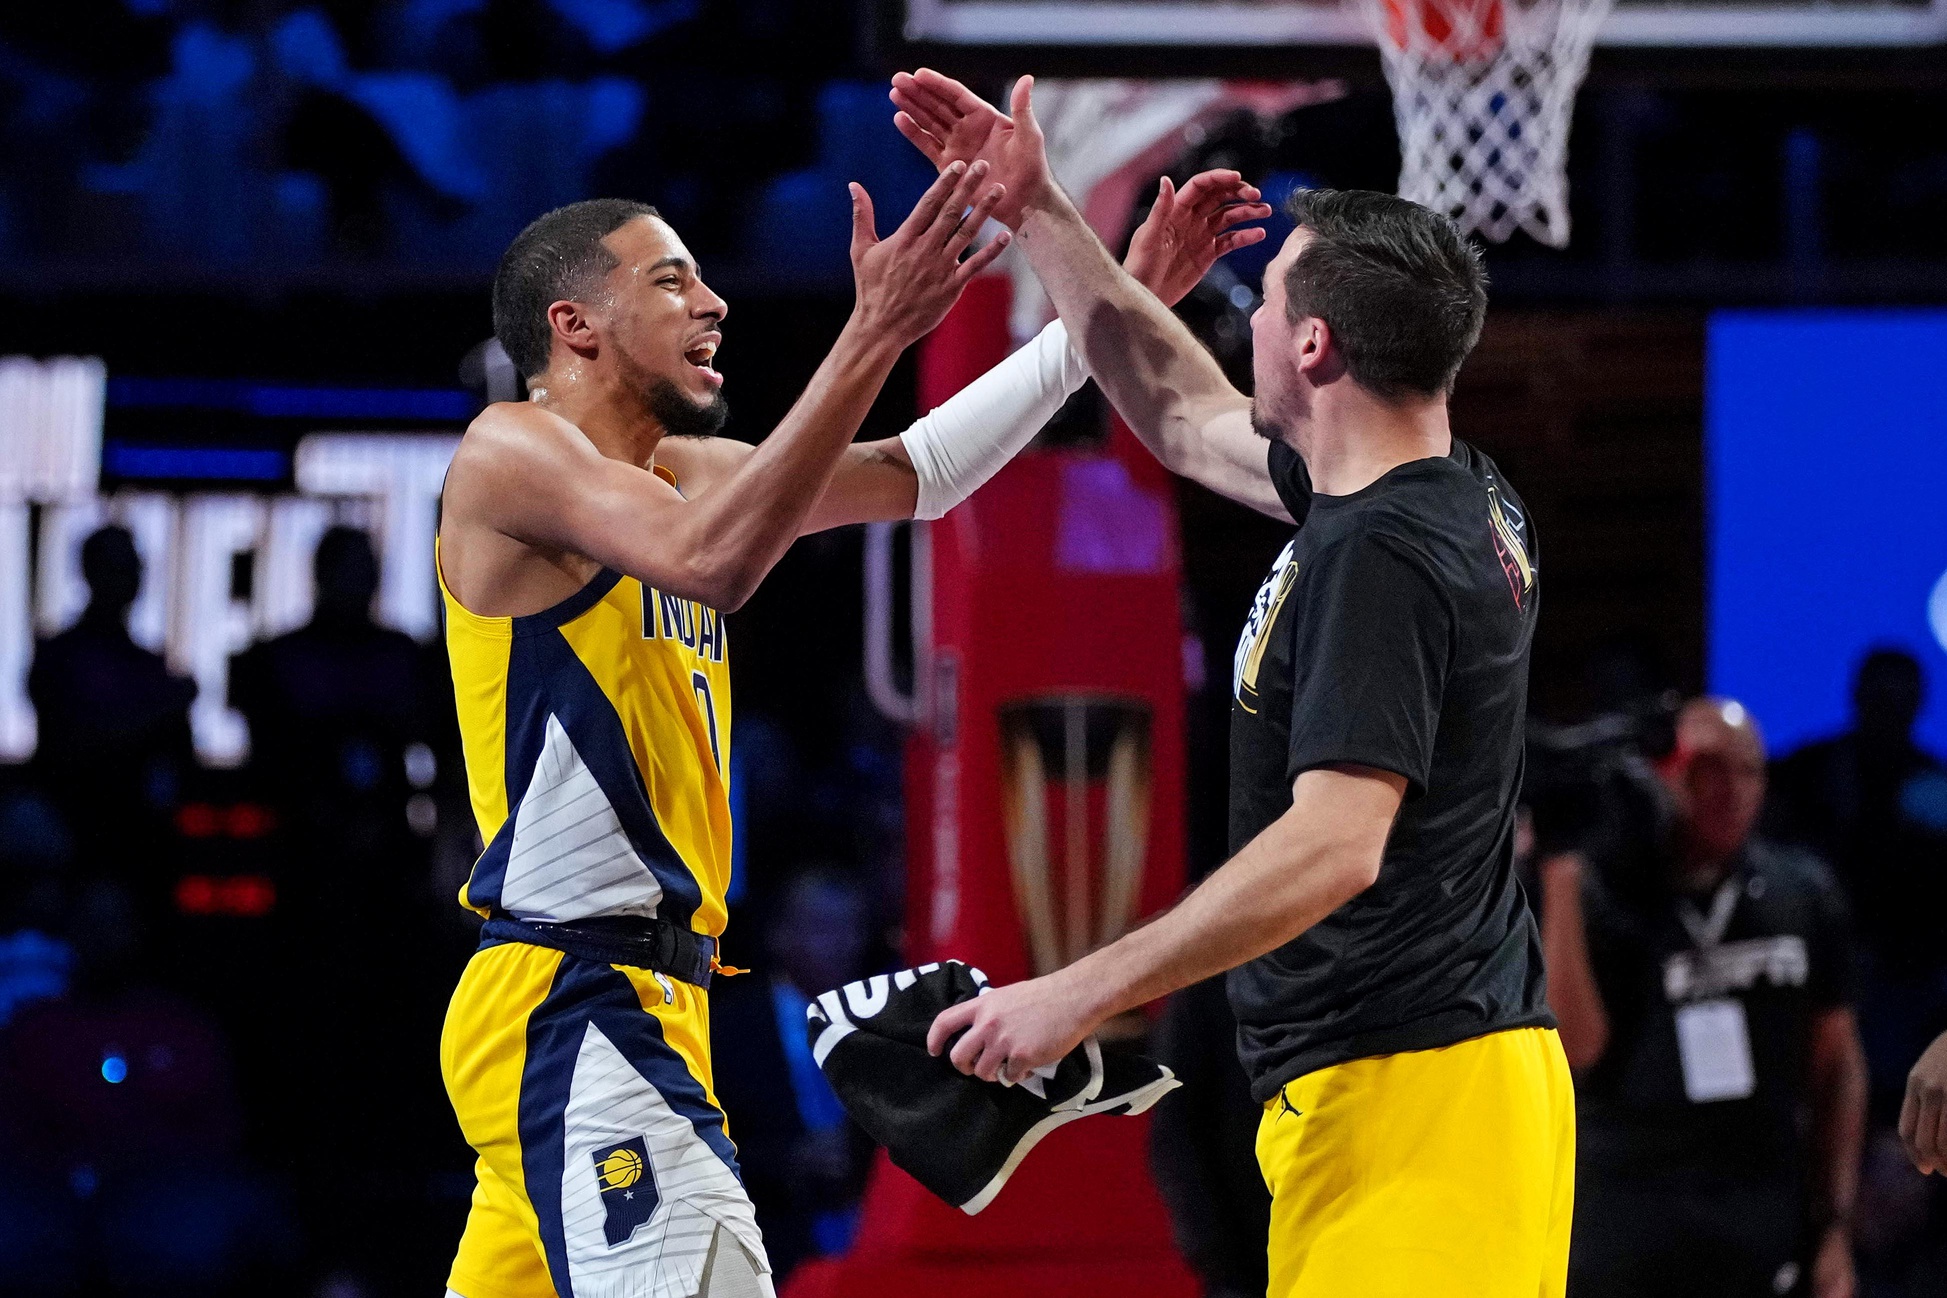 Tyrese Haliburton’s Clutch Performance Secures Indiana Pacers’ Spot in NBA In-Season Tournament Finals